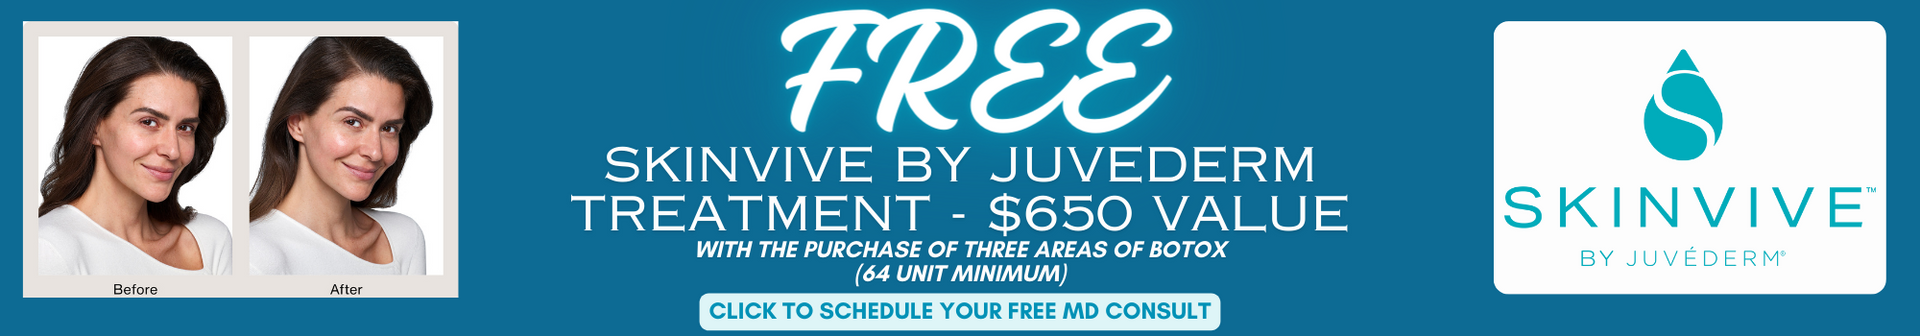 free Skinvive by Juvederm treatment with the purchase of 64 units of Botox at  at Dr. Mantor's Wrinkle and Weight Solutions, LLC in Westerville, OH